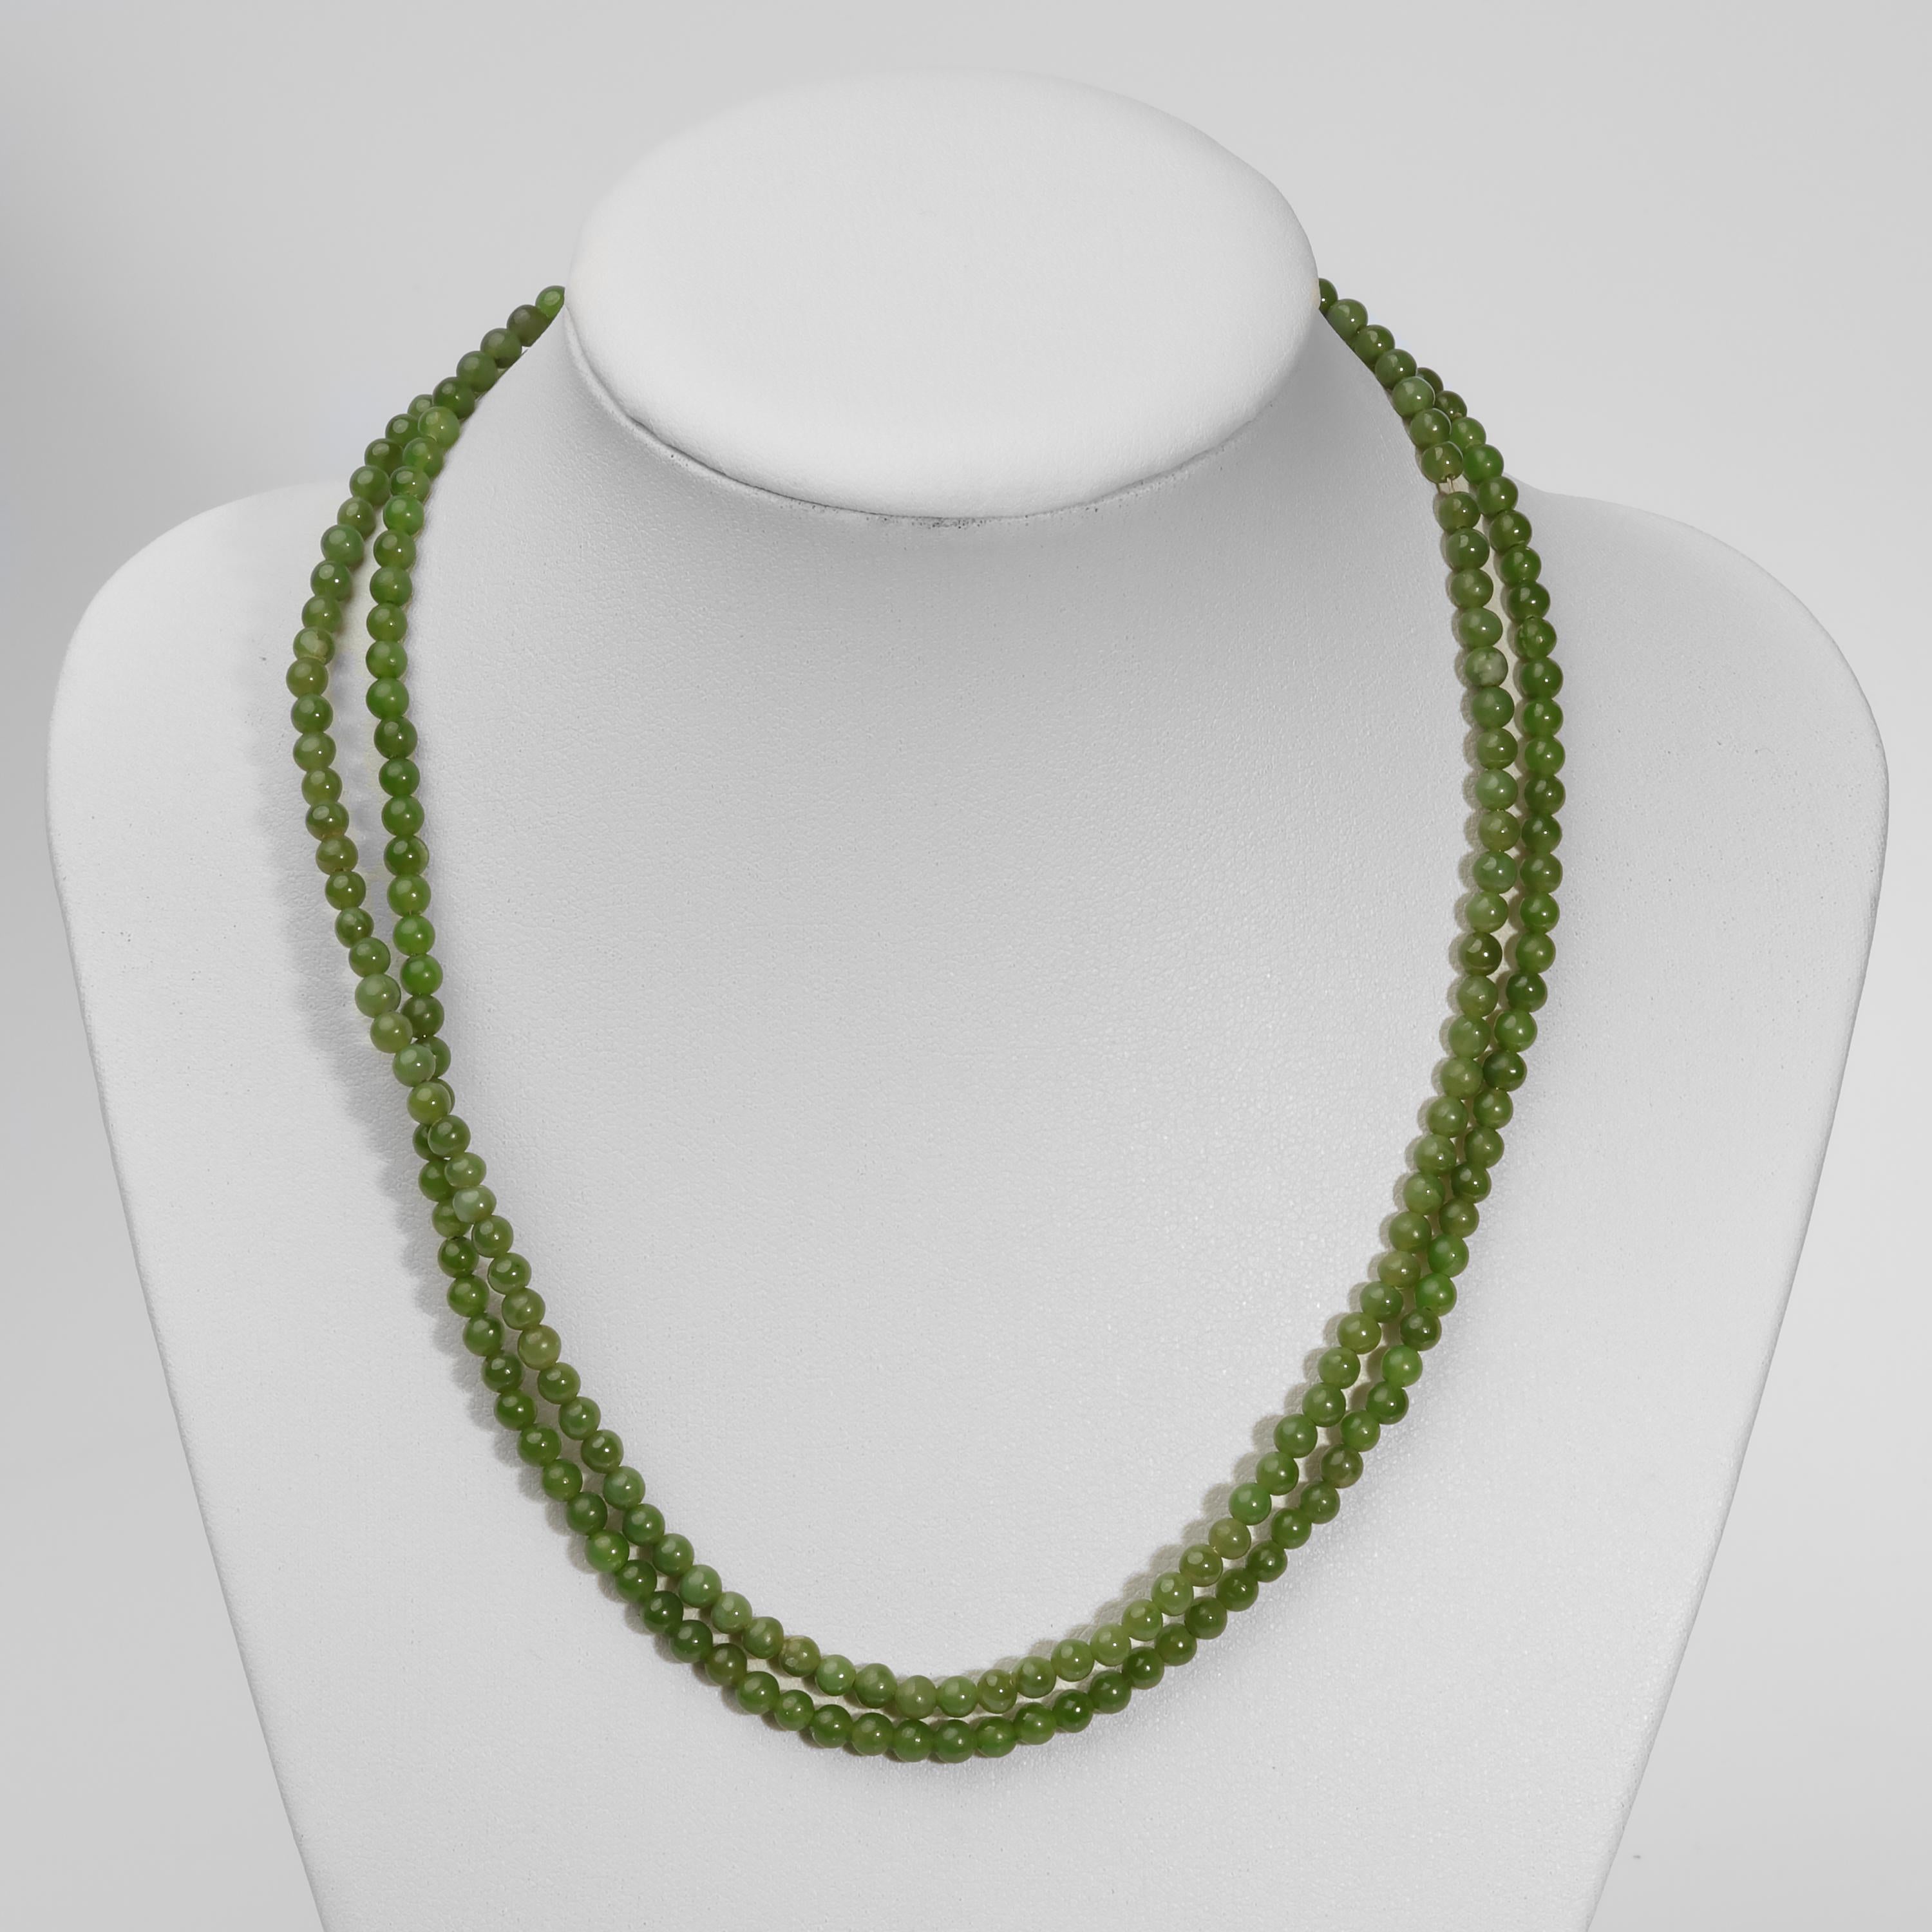 This interesting necklace is composed of 213 translucent nephrite jade beads, each hand-carved and measuring between approximately 4mm and 4.5mm. The beads are a very pleasing sage green and because of their excellent translucency, they are gemmy